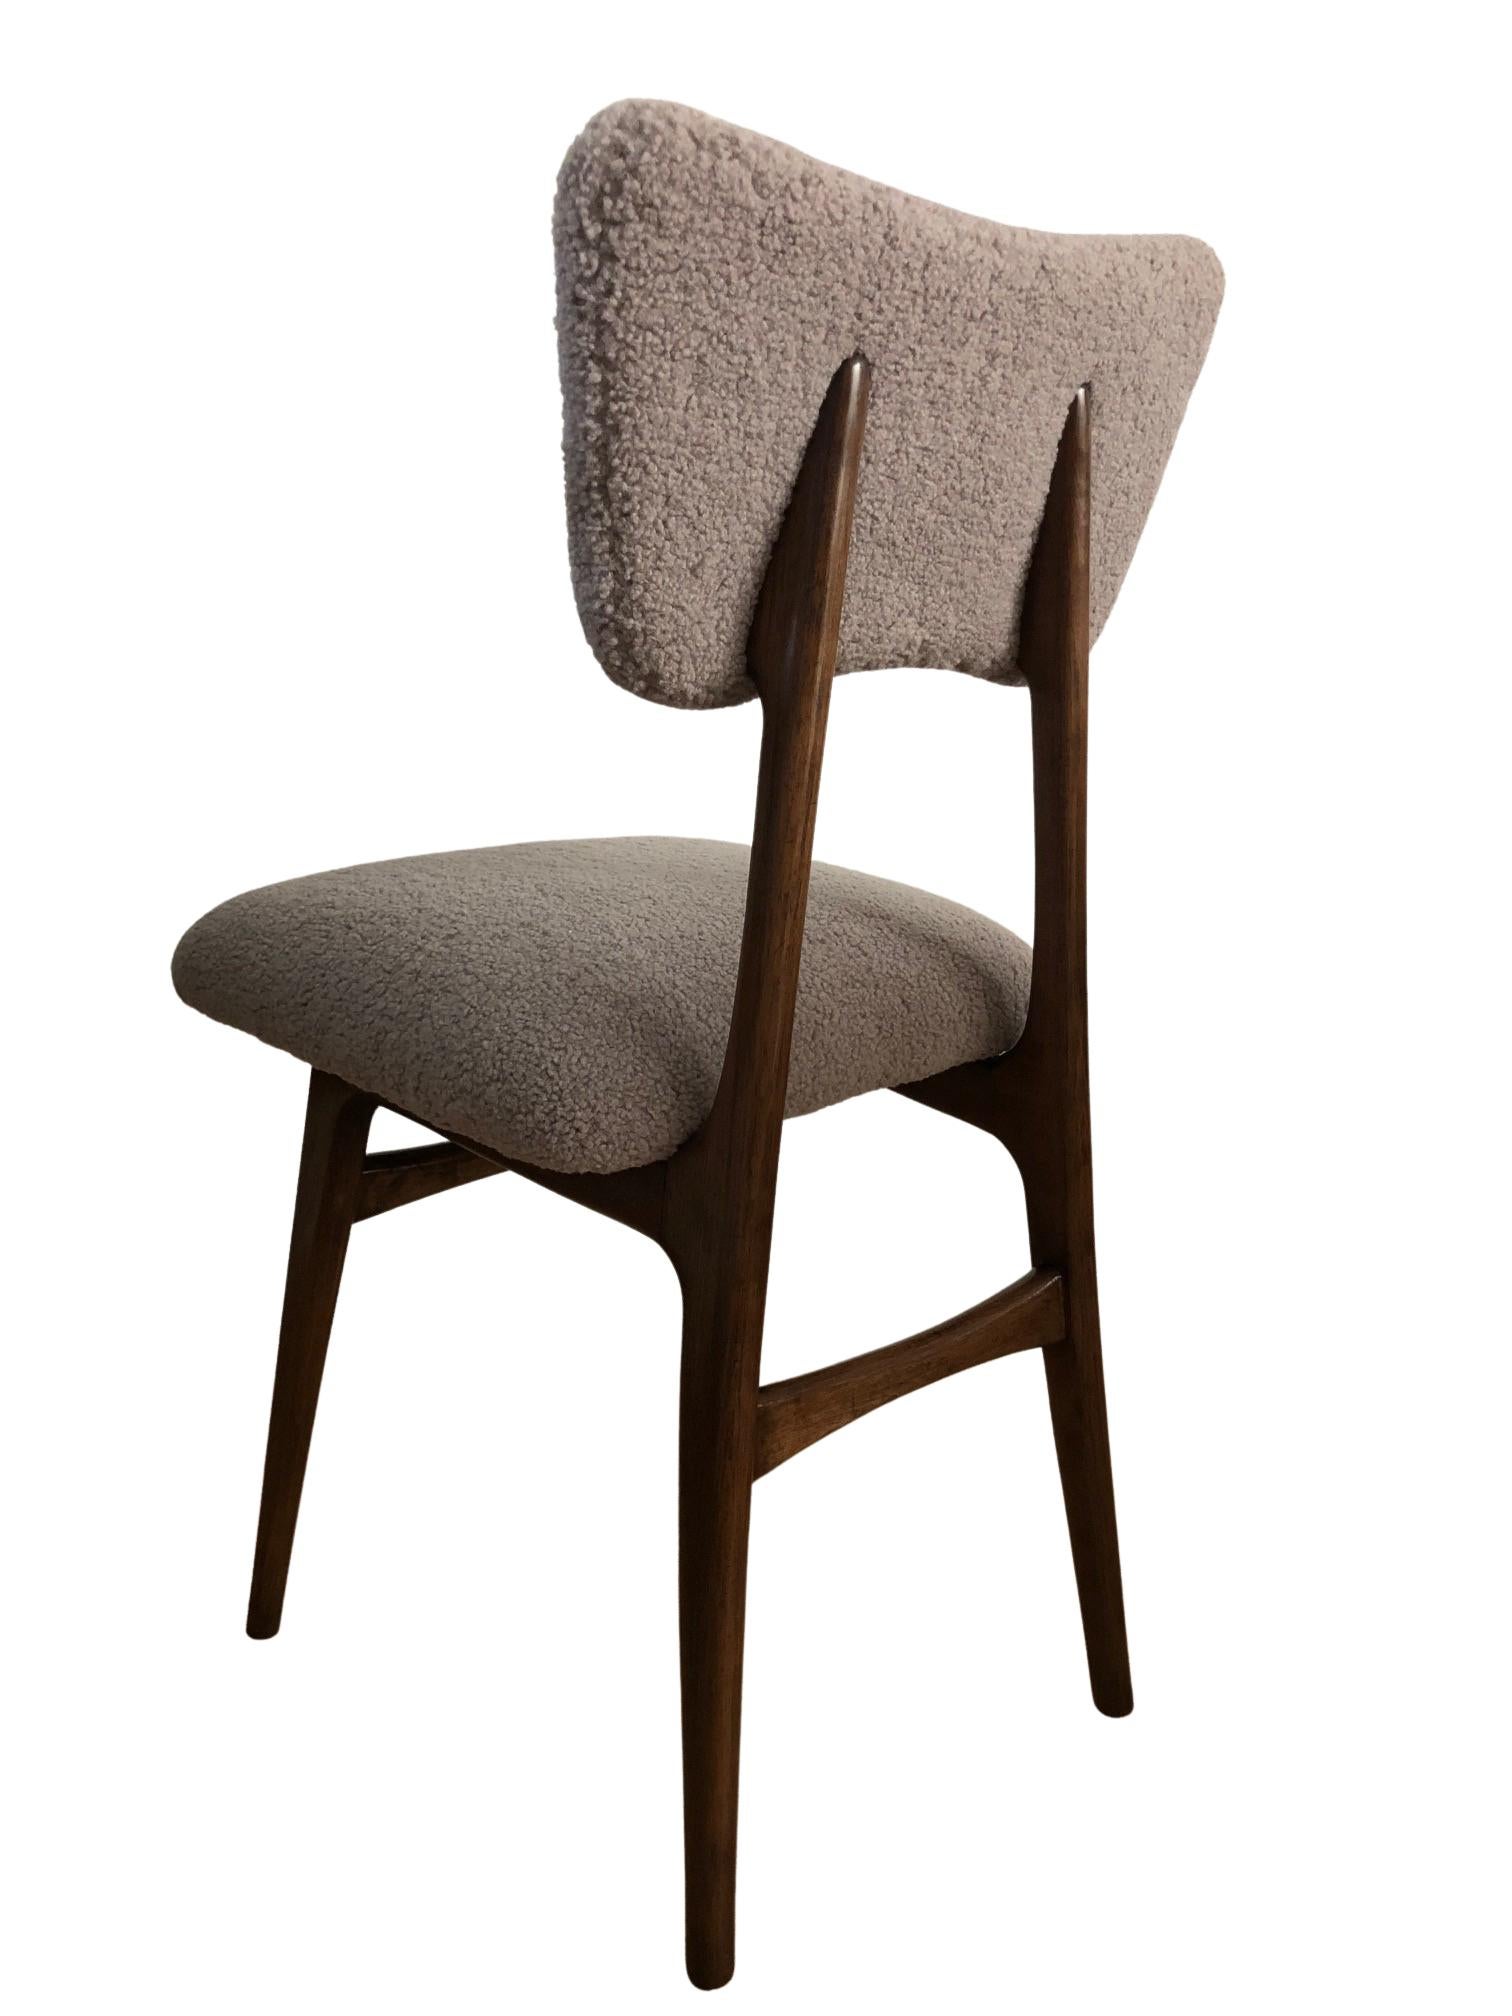 Polish Set of 4 Midcentury Beige Bouclé Dining Chairs, Europe, 1960s For Sale